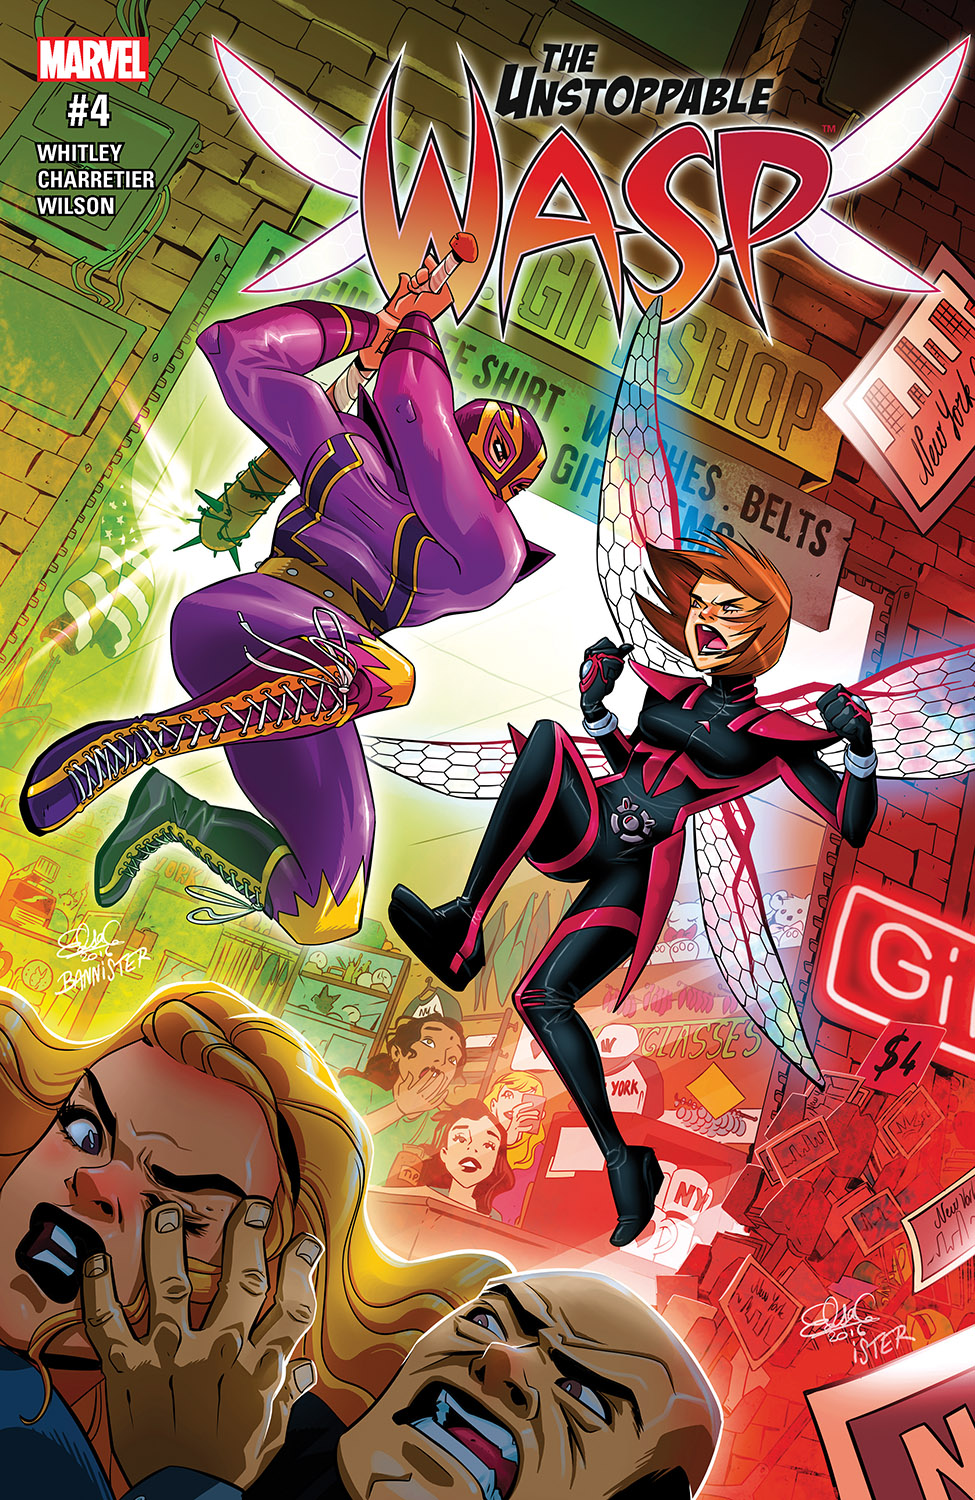 The Unstoppable Wasp (2017) #4